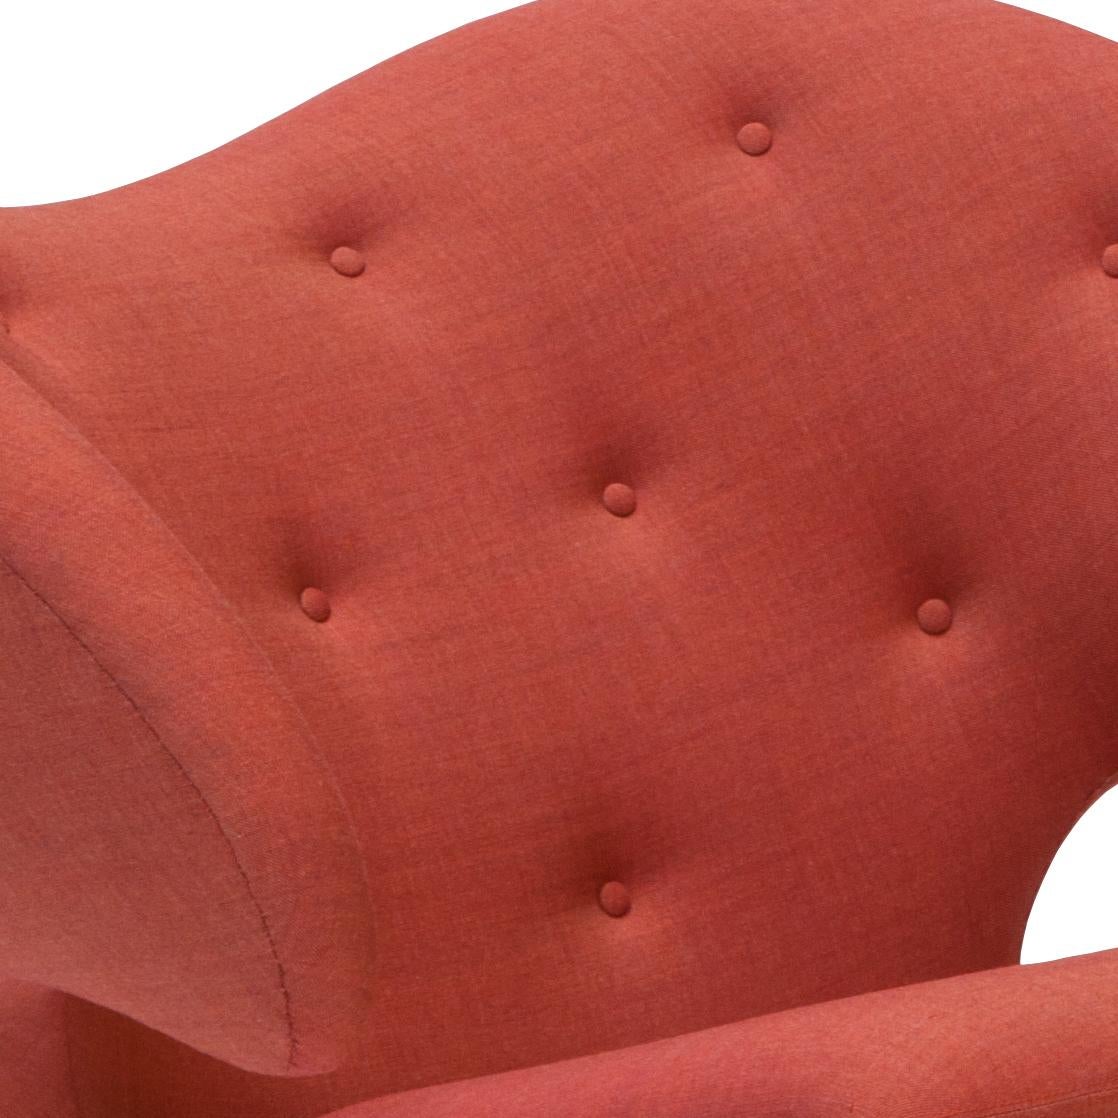 Contemporary Finn Juhl Pelican Chair Upholstered in Red Kvadrat Remix Fabric